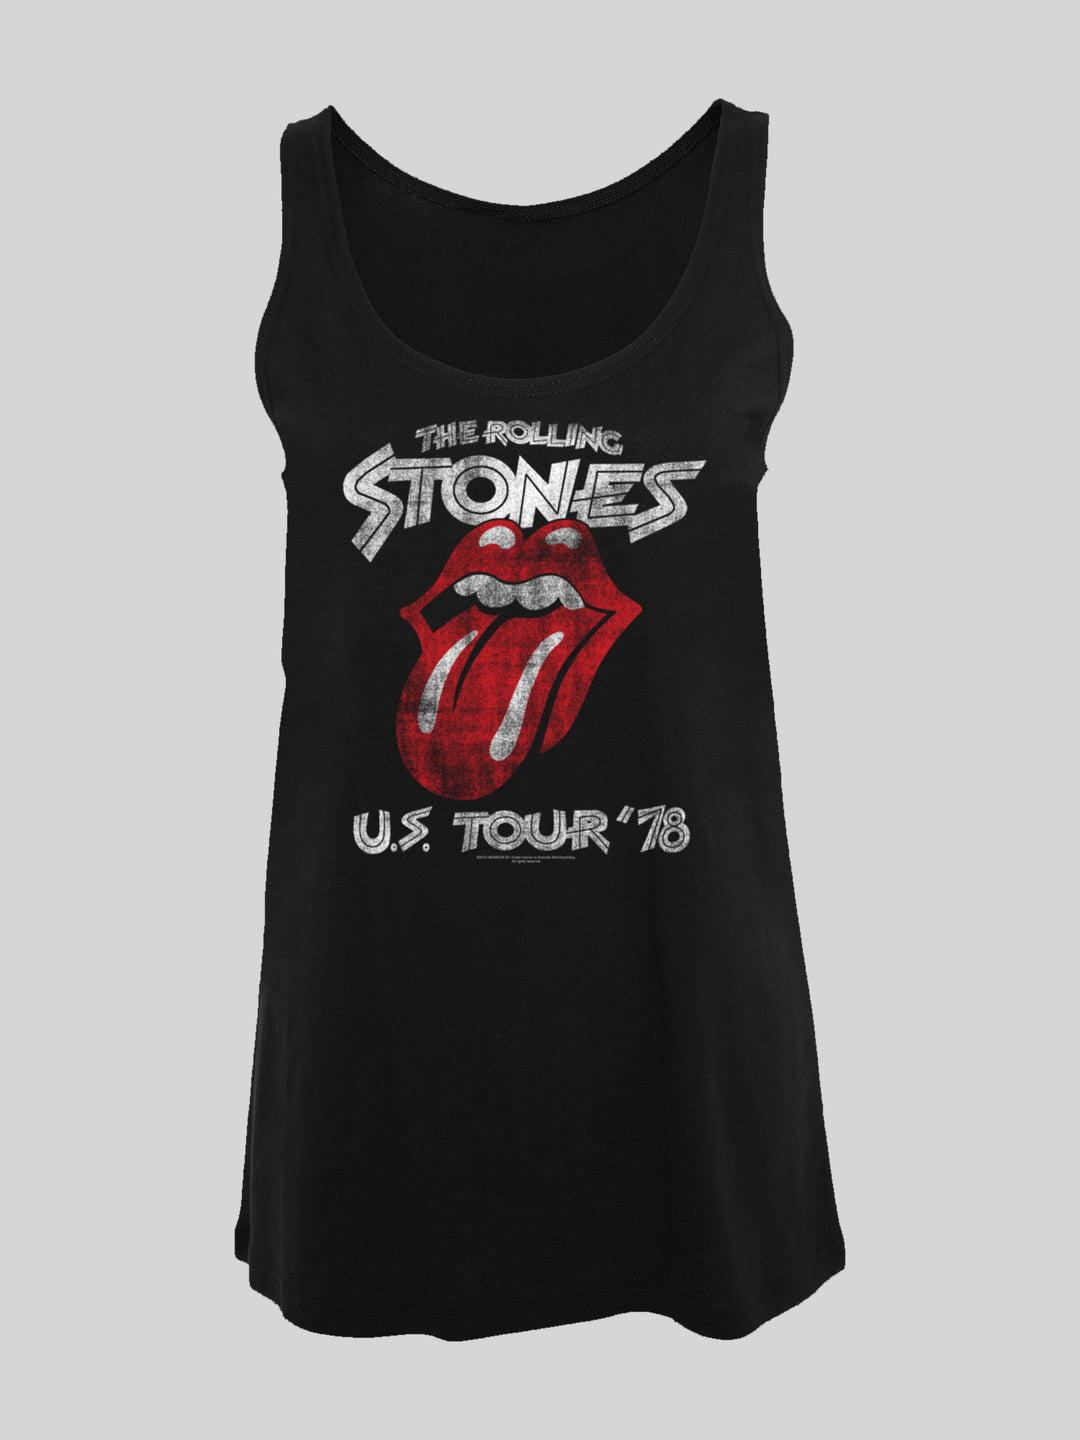 The Rolling Stones US Tour '78 and The Rolling Stones US Tour '78 Black with Ladies Tanktop